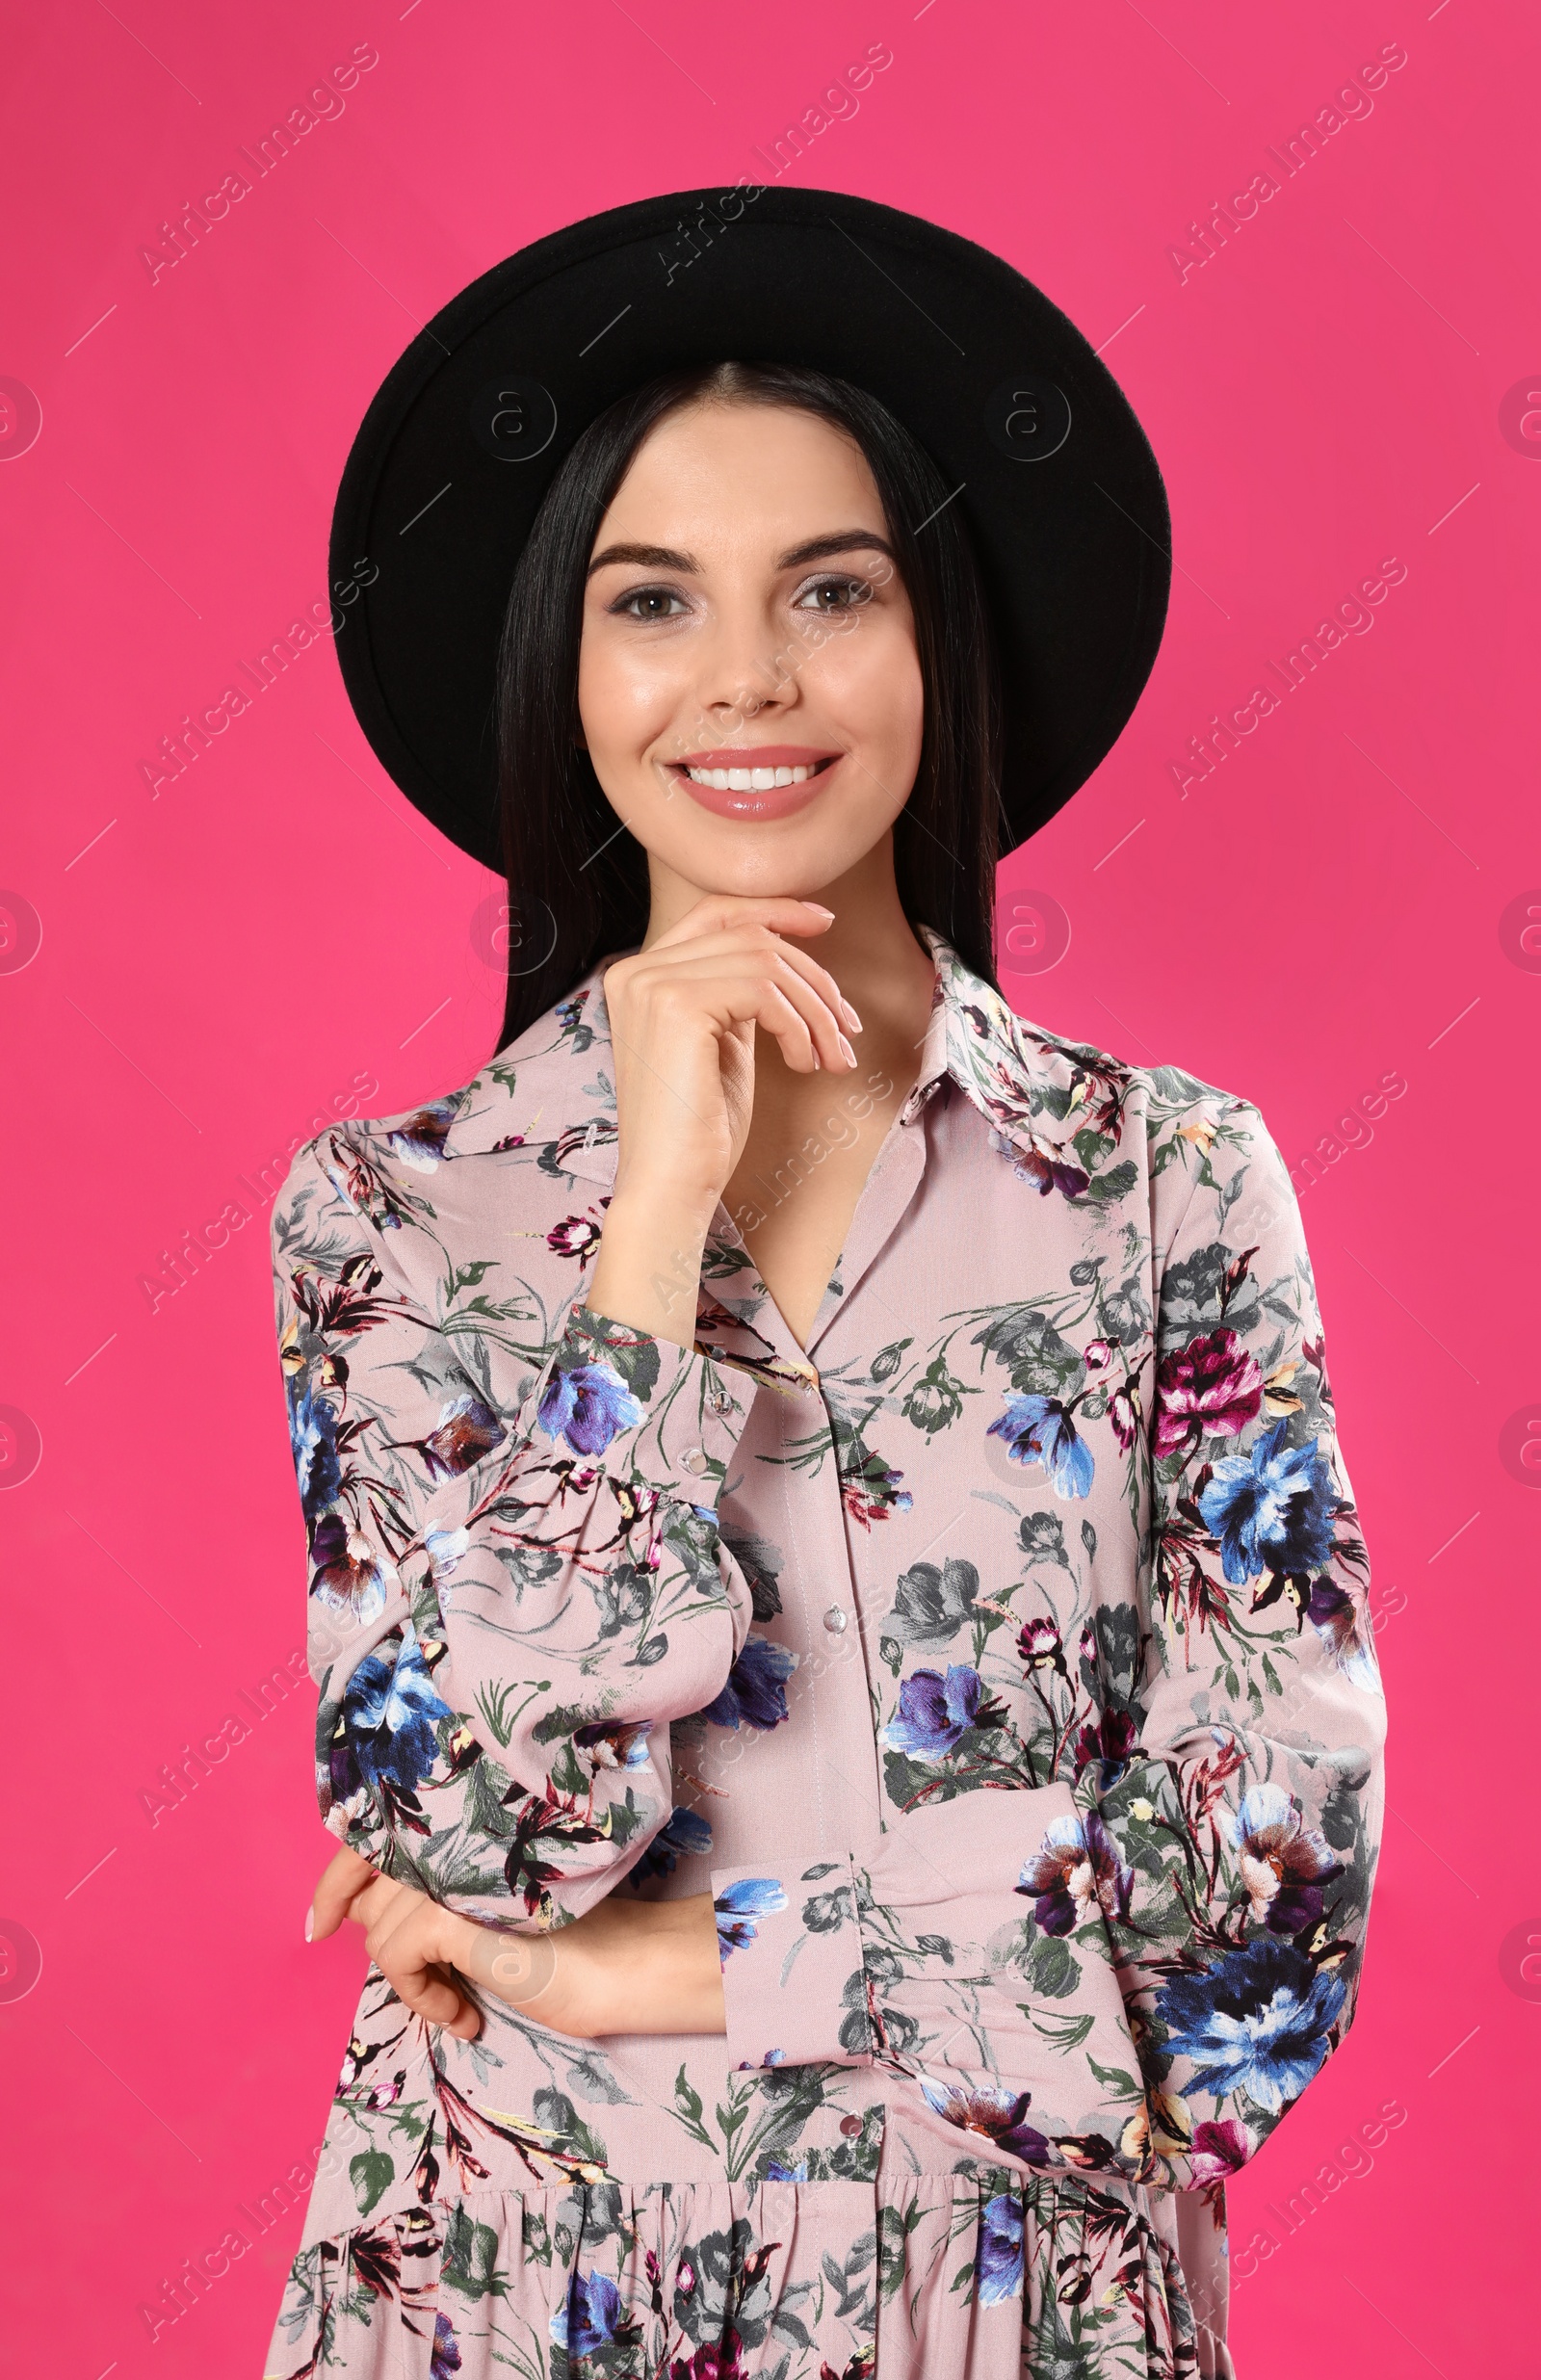 Photo of Young woman wearing floral print dress and stylish hat on pink background